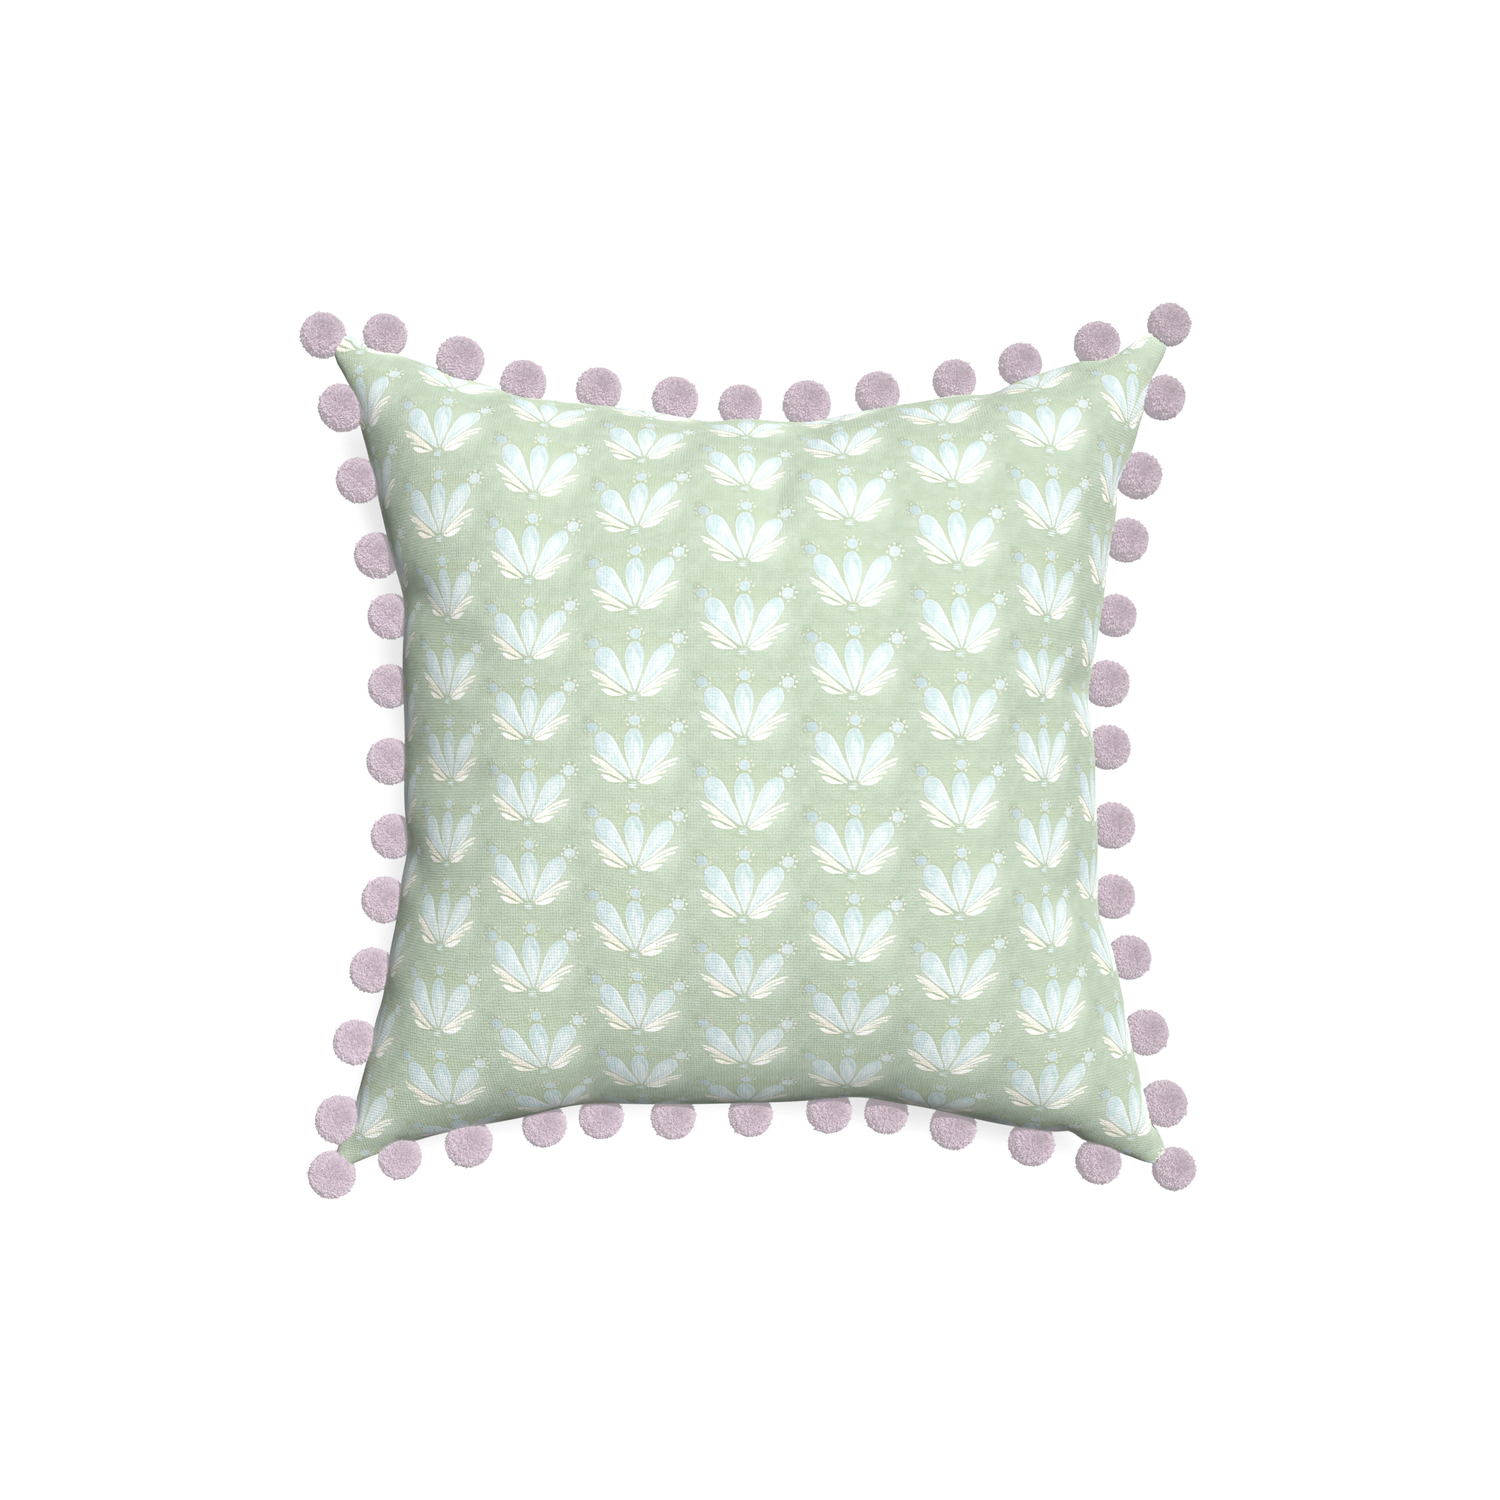 18-square serena sea salt custom blue & green floral drop repeatpillow with l on white background